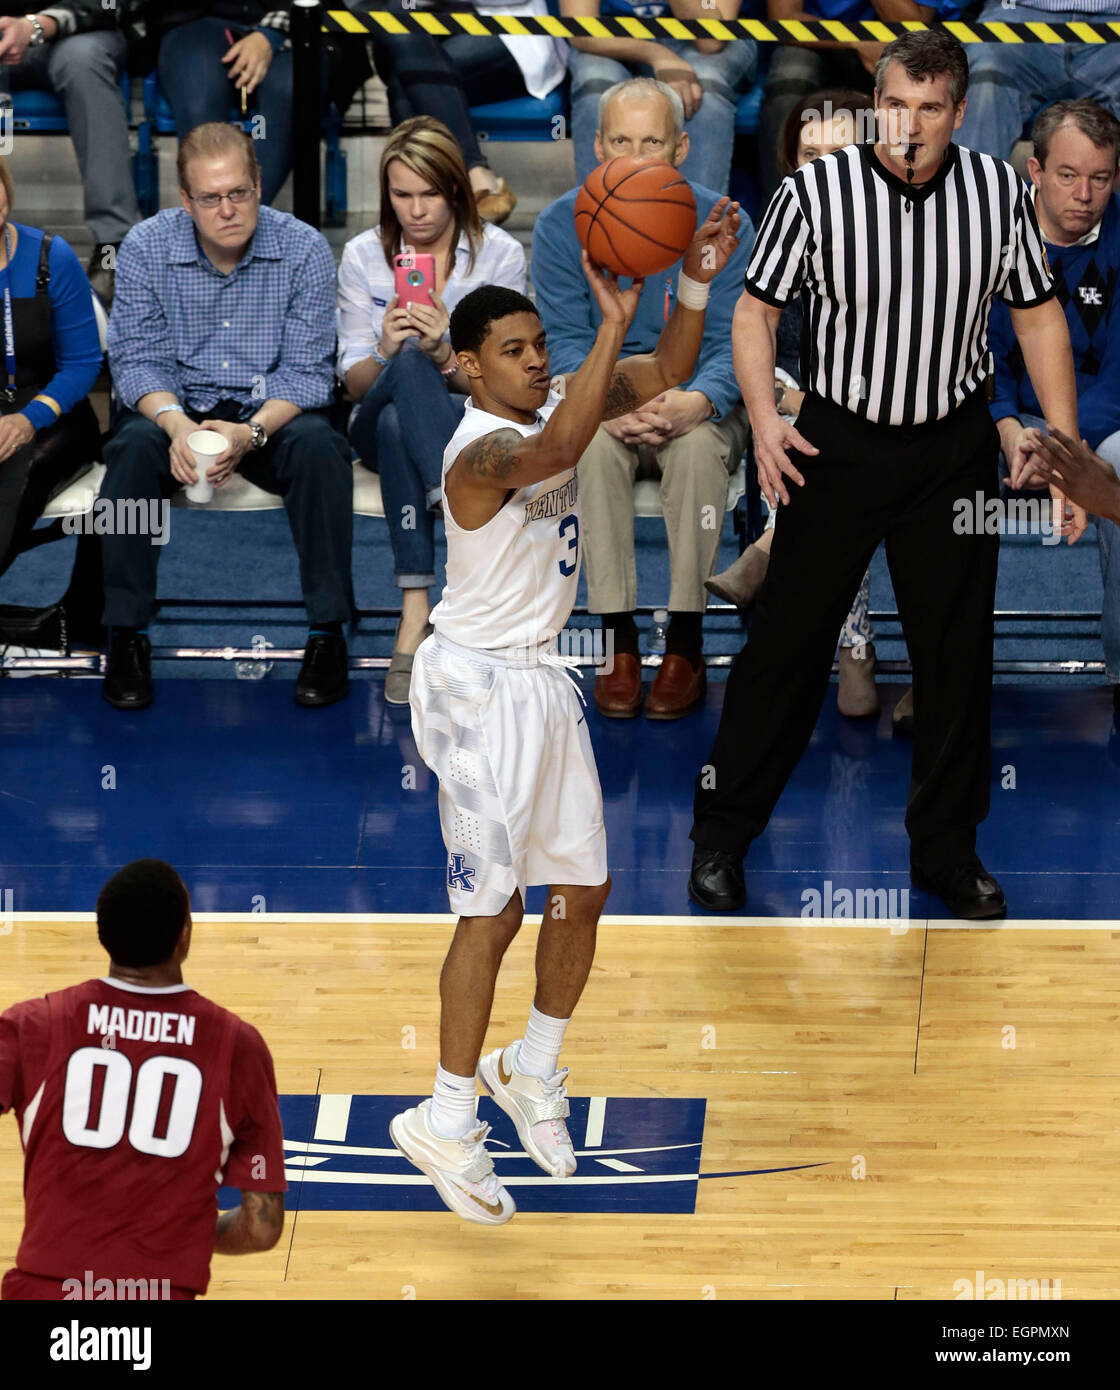 Lexington, KY, USA. 28th Feb, 2015. Kentucky Wildcats guard Tyler Ulis (3) hit a 3-pointer as the University of Kentucky played the University of Arkansas in Rupp Arena in Lexington, Ky., Saturday February 28, 2015. This is first half action. Photo by Charles Bertram | Staff © Lexington Herald-Leader/ZUMA Wire/Alamy Live News Stock Photo